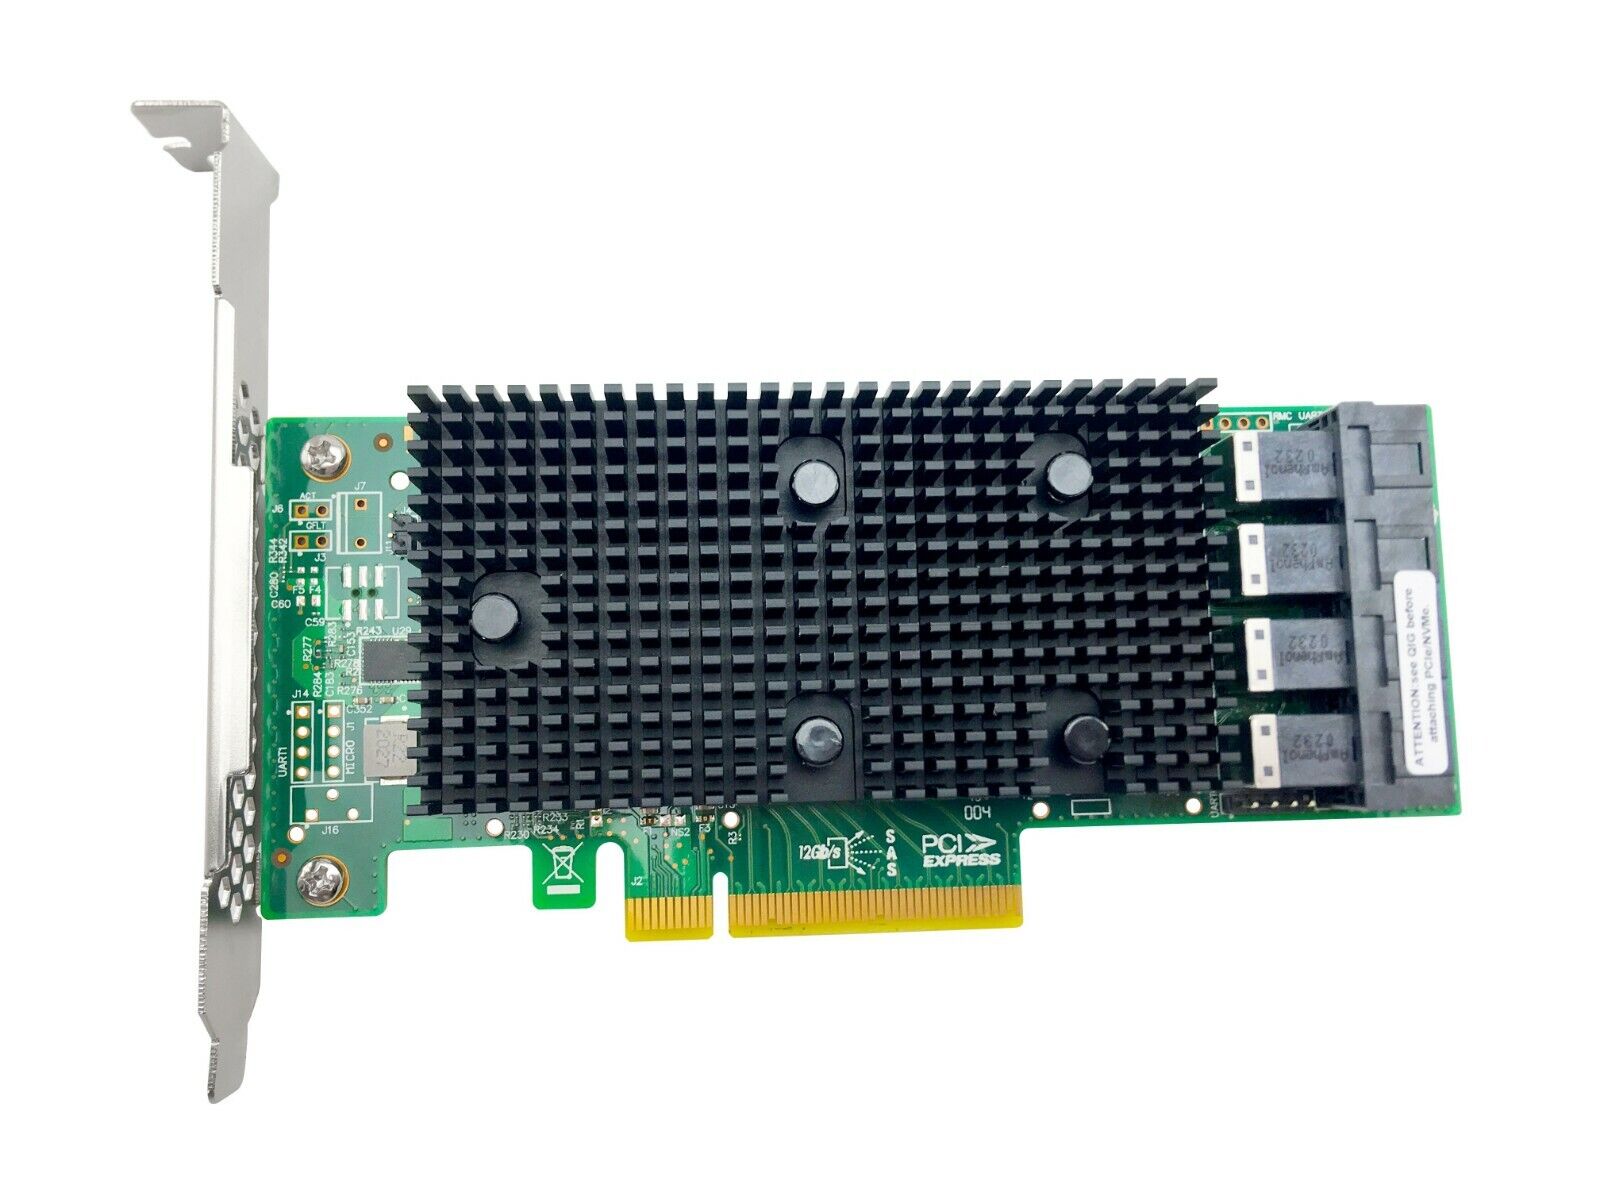 LSI 9400-16i SATA/SAS HBA Controller CARD 12 Gbps PCIe 16 Port Support NVME HDD